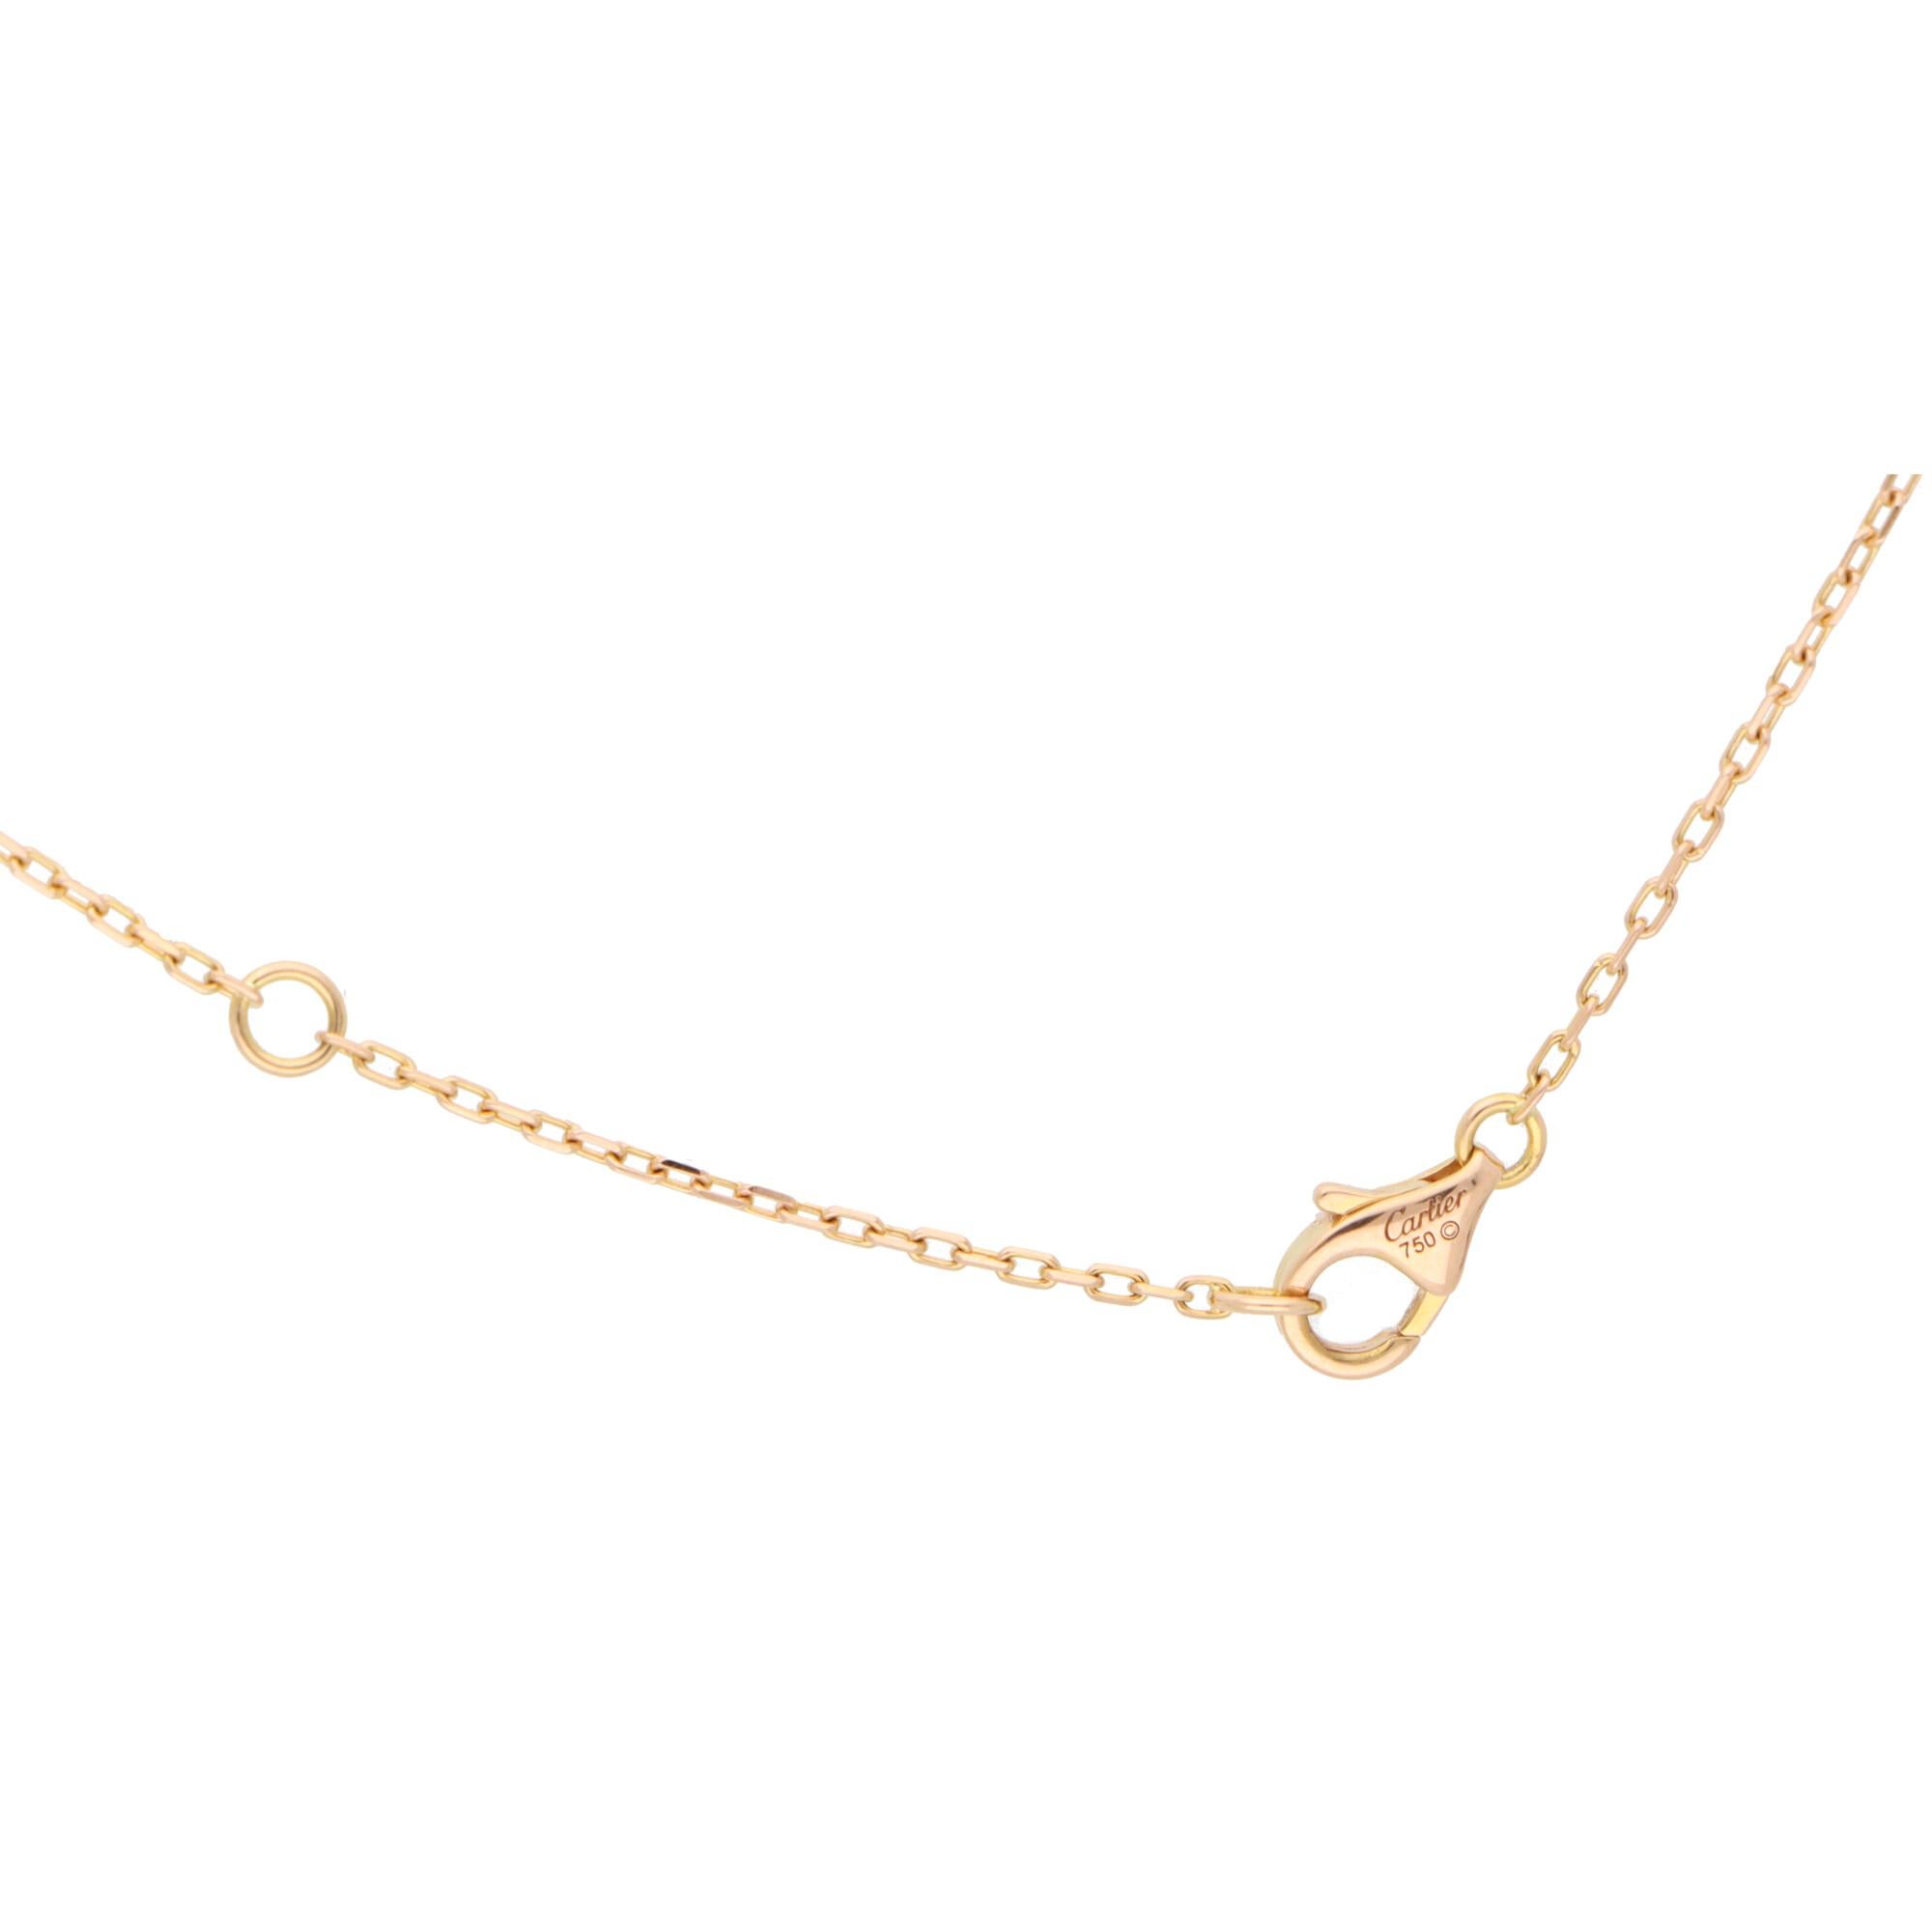 Modern Vintage Cartier Open Heart Trinity Necklace Set in 18k Rose, Yellow & White Gold